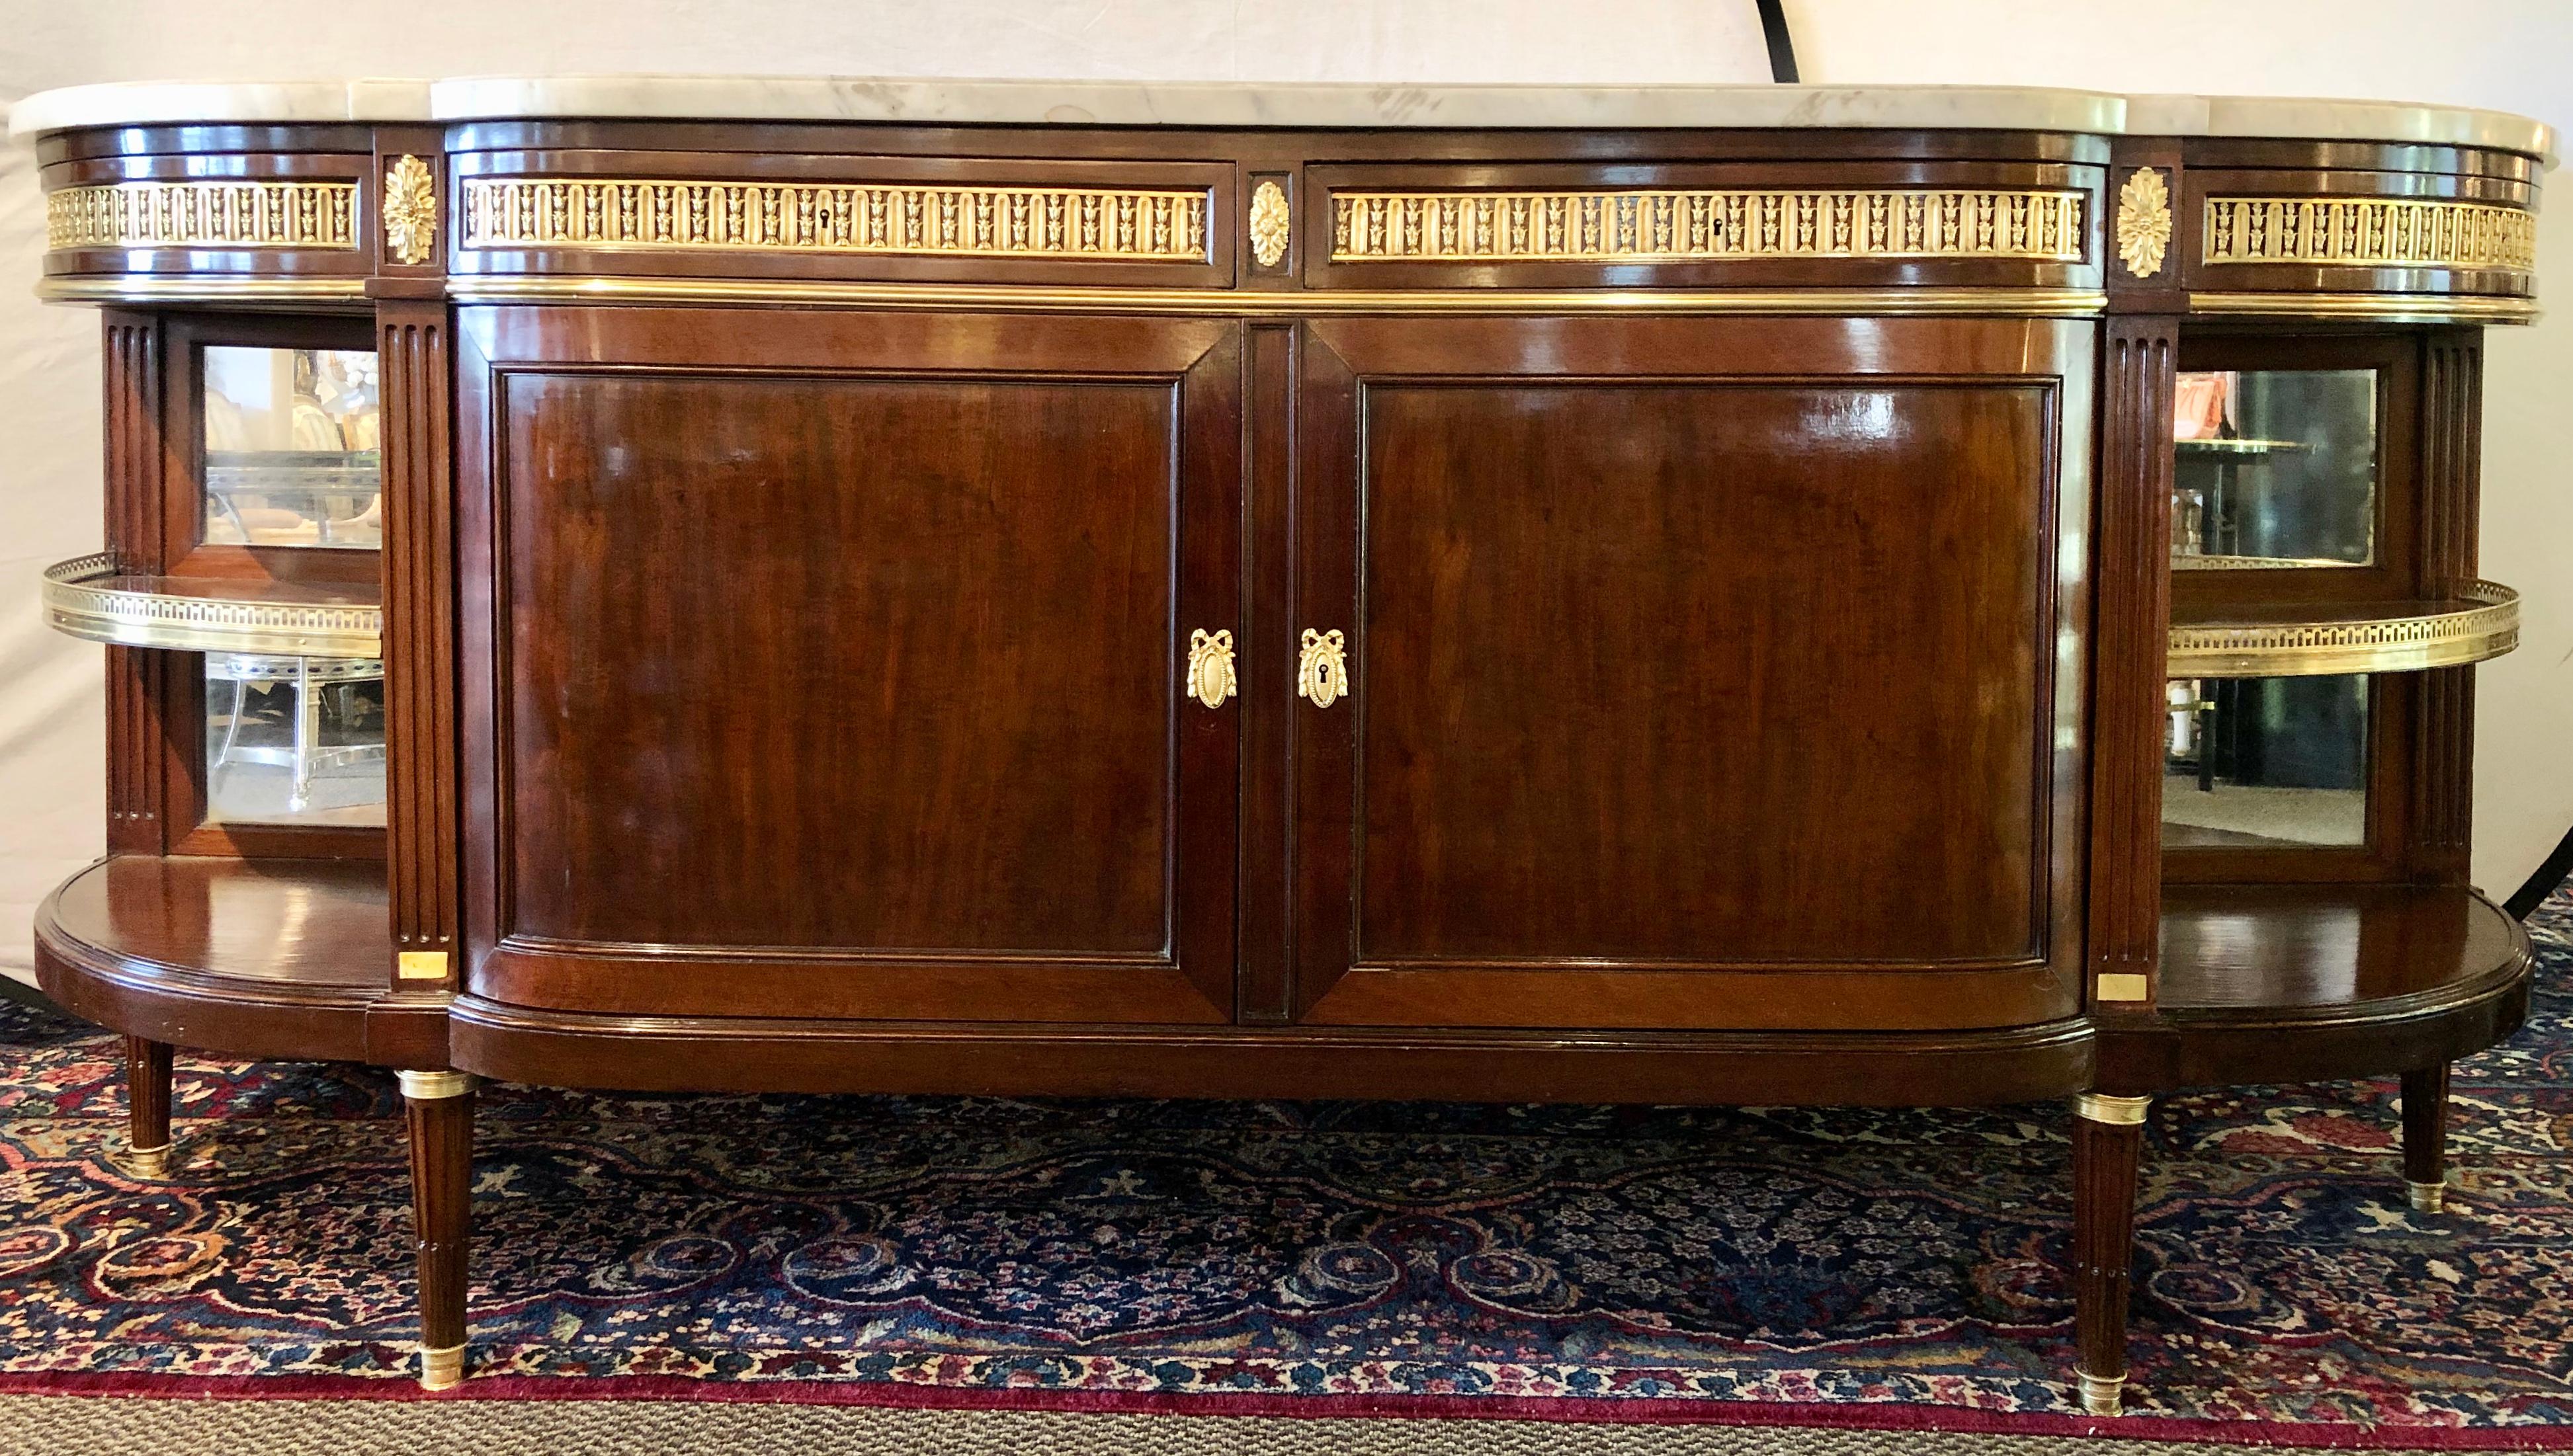 19th century Louis XVI sideboard, cabinet or console by Maison Forest. This finely constructed mahogany cabinet by this highly regarded cabinet maker has a thick white marble top supported by a monumental case of double doors under four drawers with